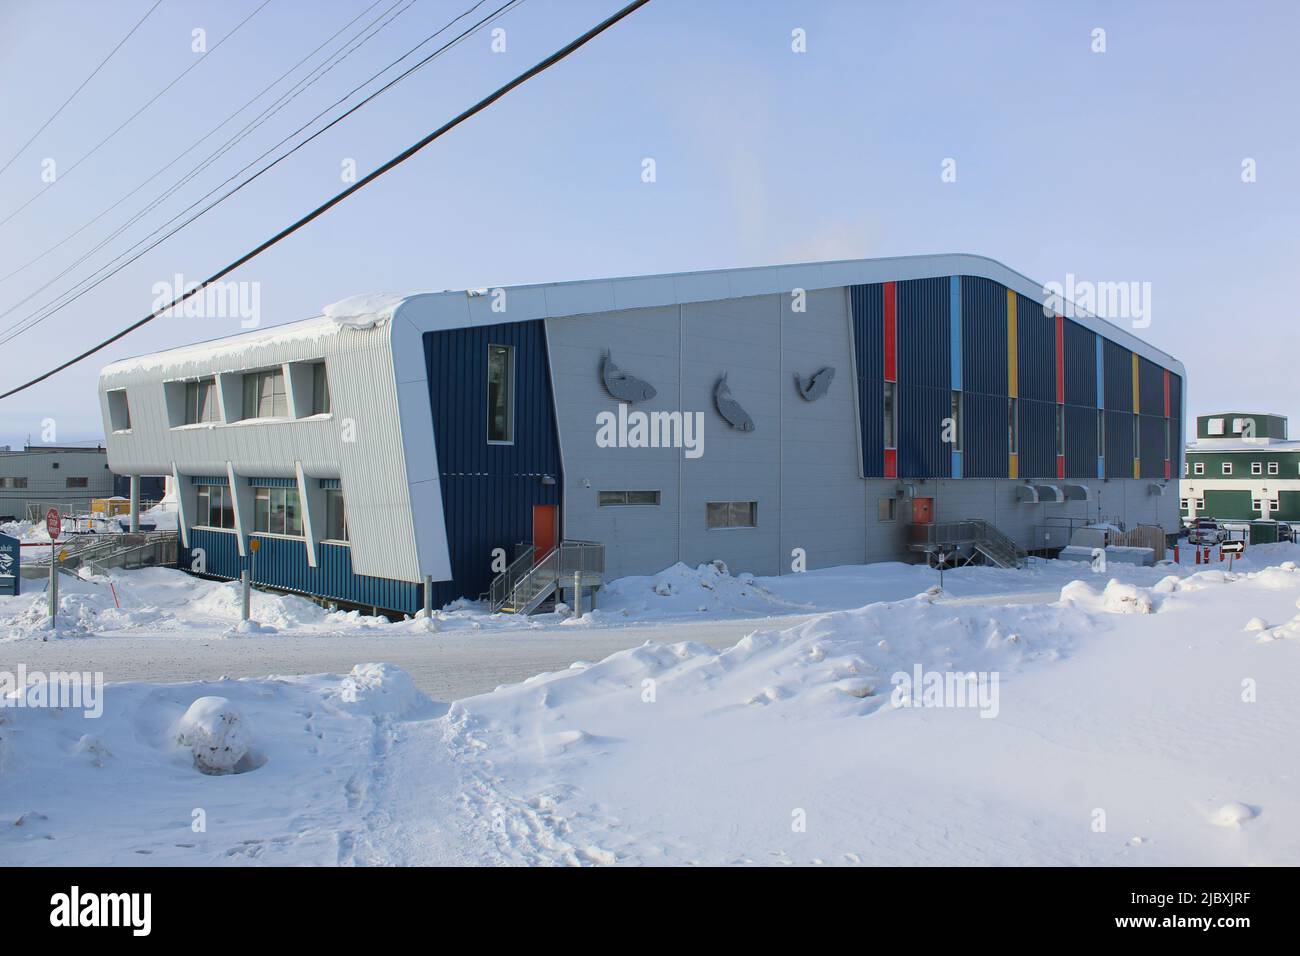 Sports and recreation center in Iqaluit, Nunavut, Canada Stock Photo